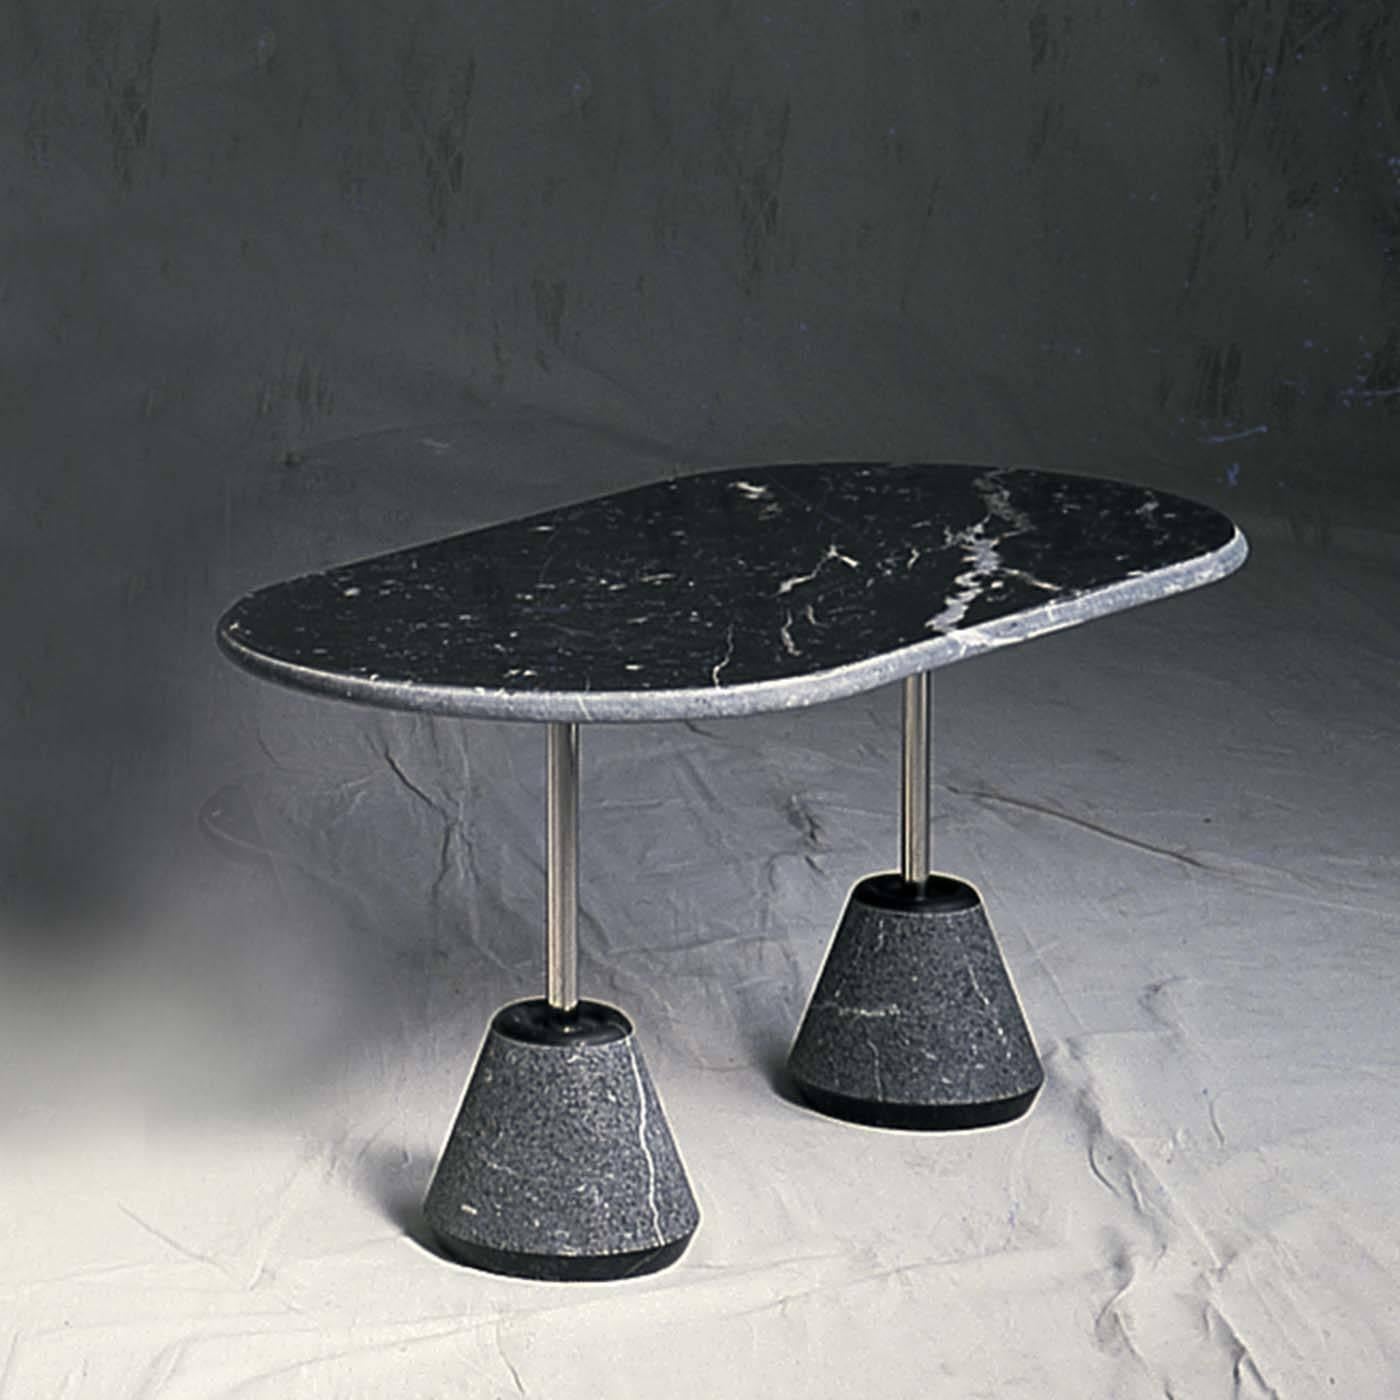 The structure of this exclusive coffee table designed by Achille Castiglioni for UpGroup is both light and robust, as it plays on the idea of balance and tension, giving the design a dynamic quality. The striking black Marquinia oval top rests on a